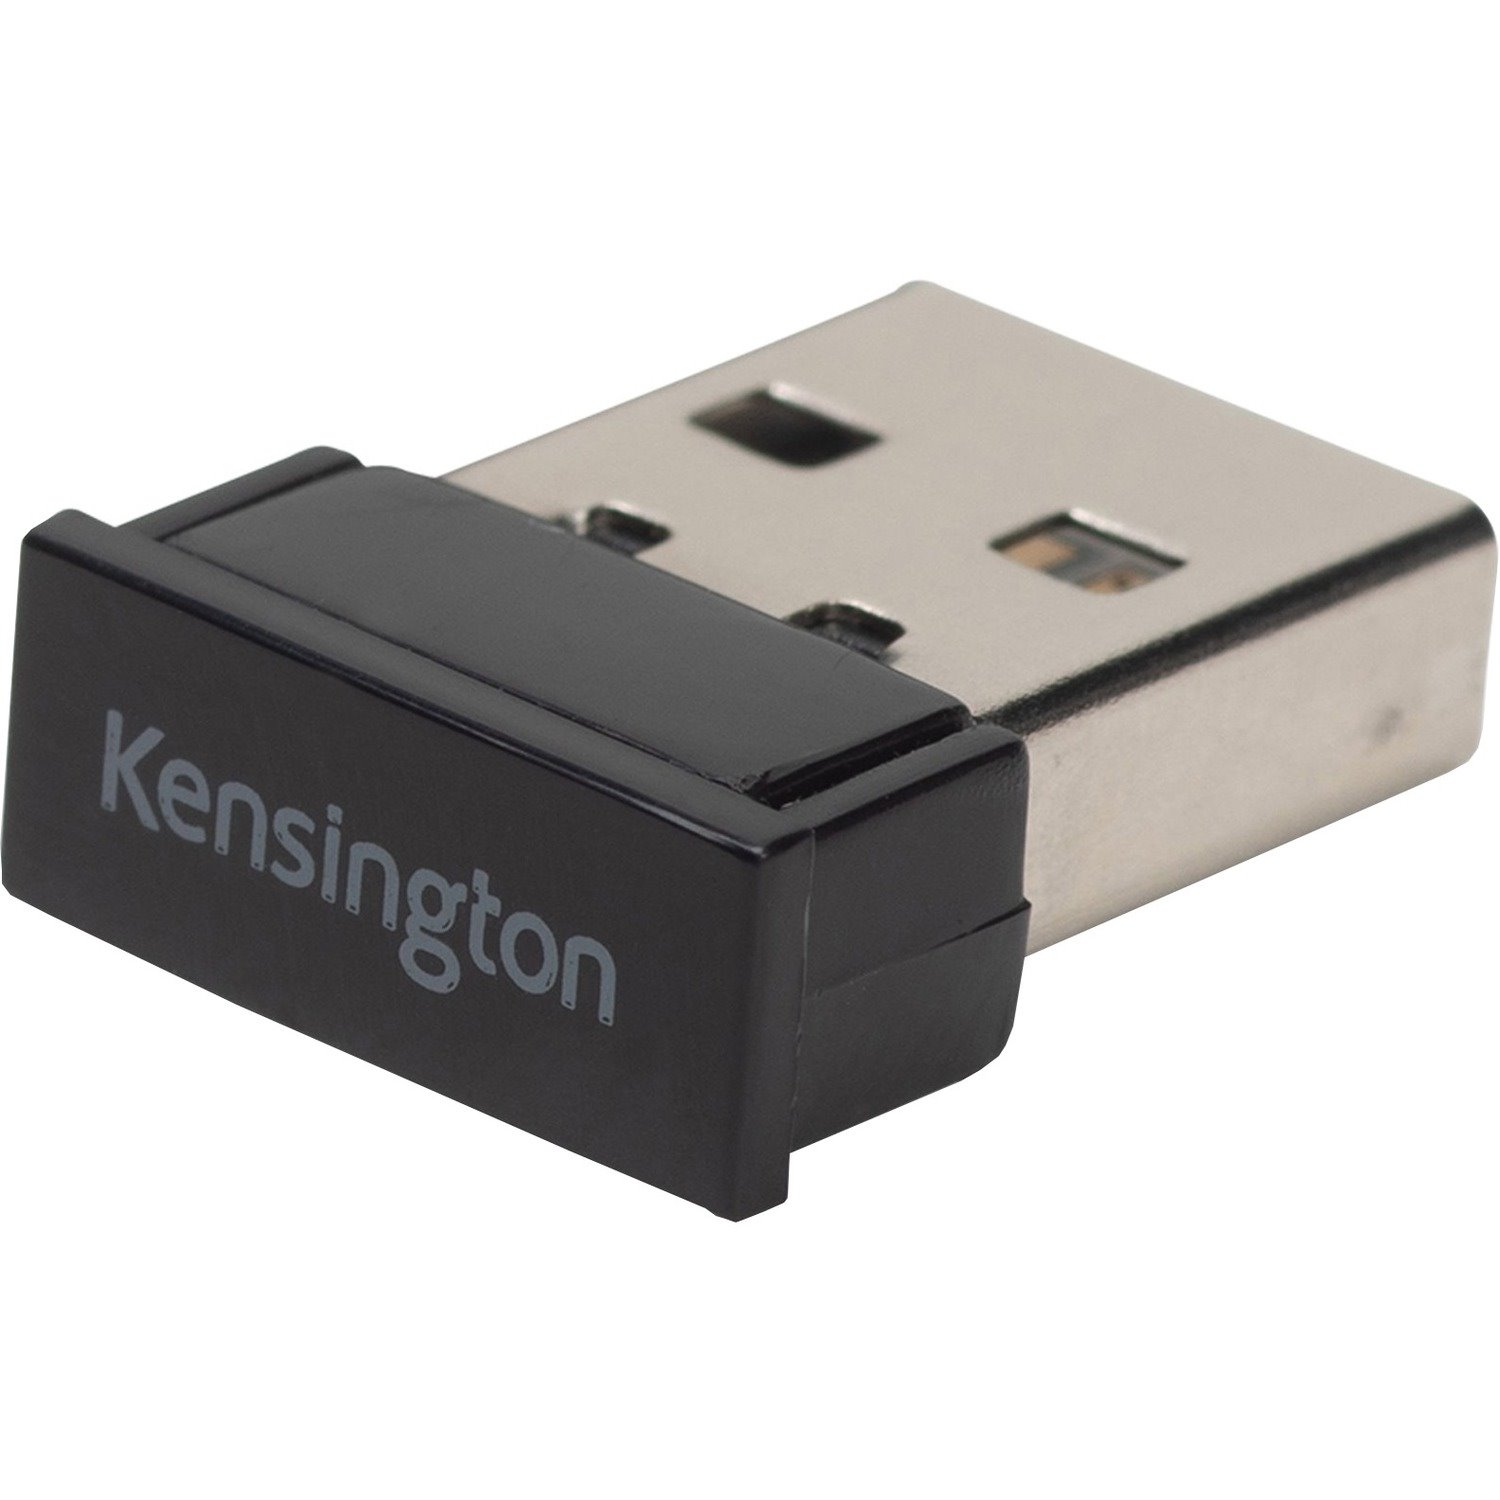 Kensington Wi-Fi Adapter for Keyboard/Mouse